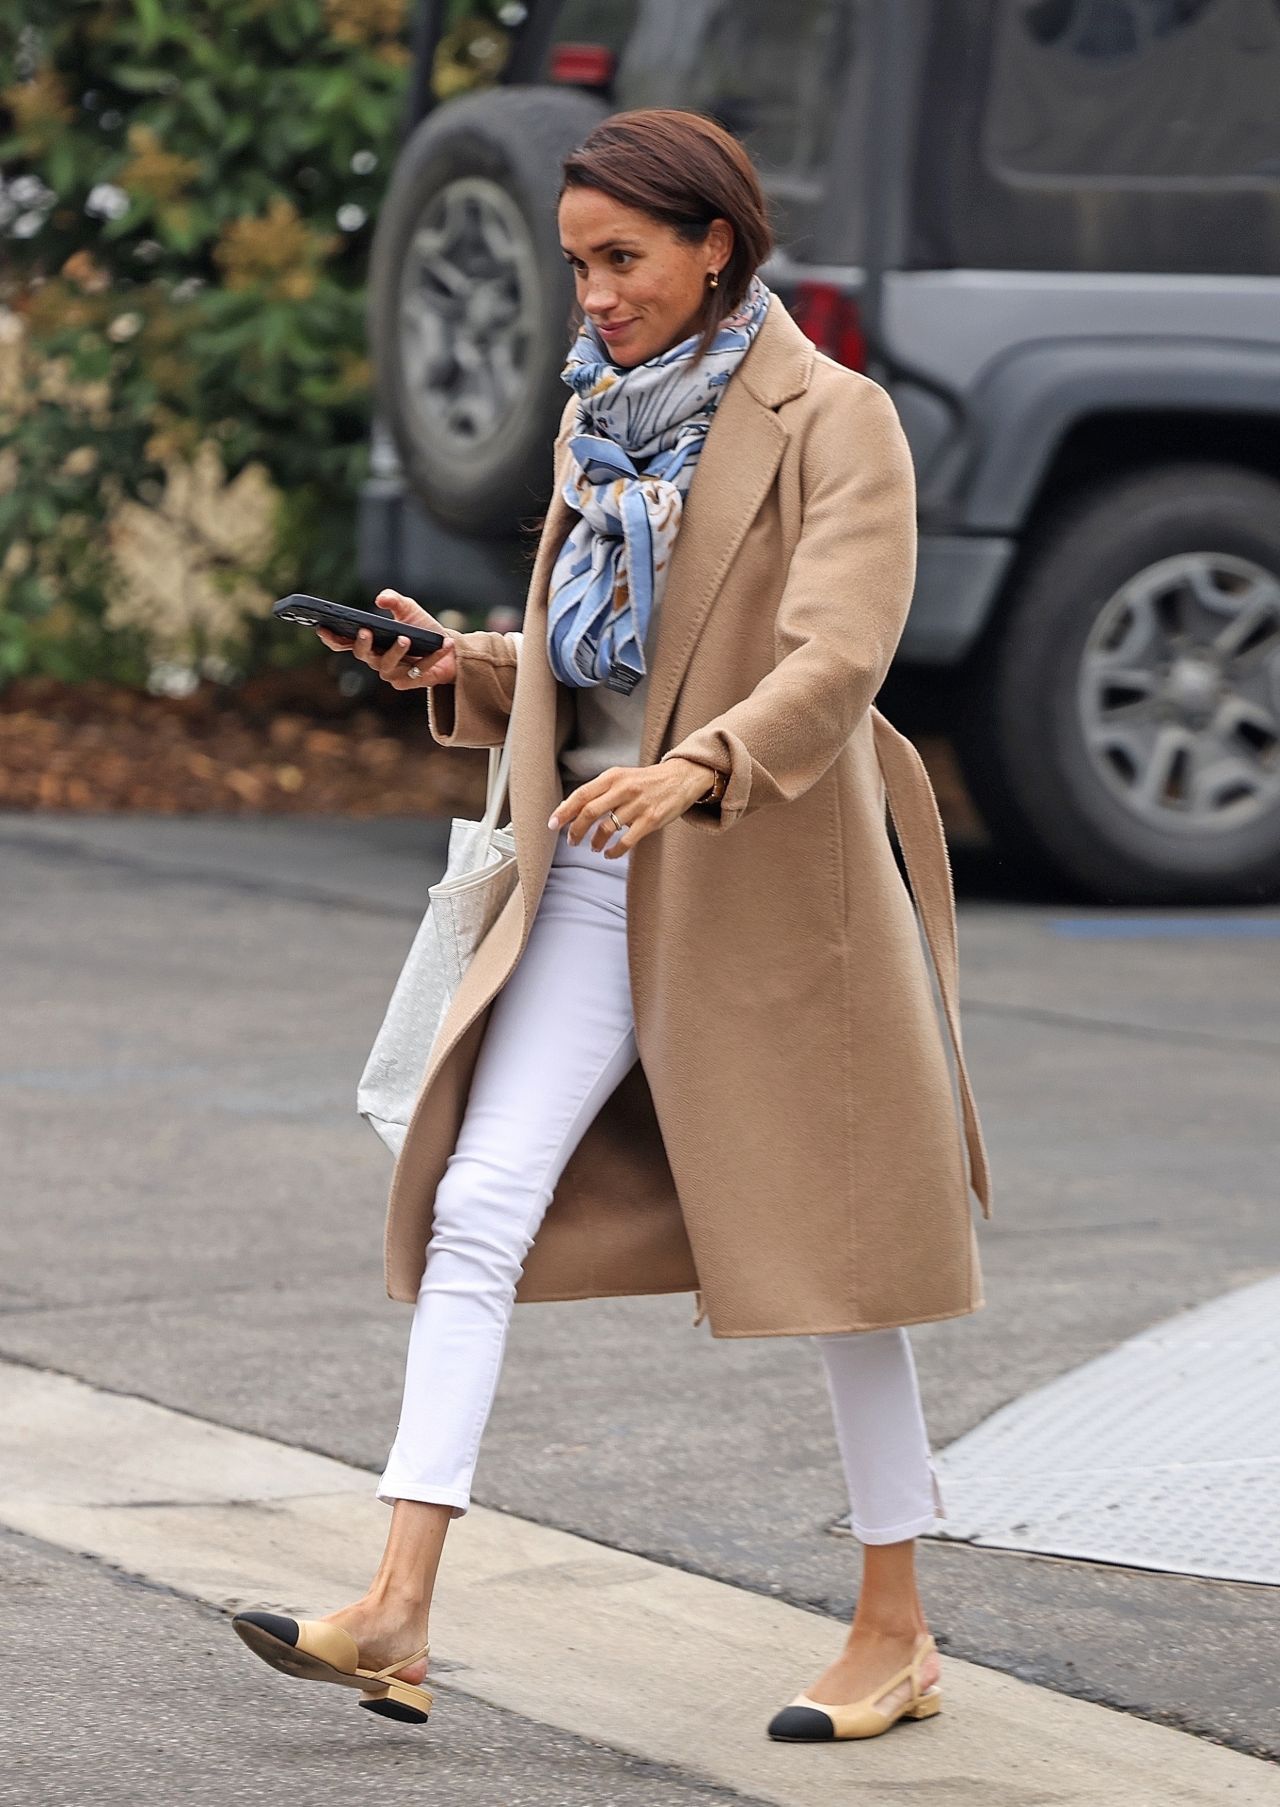 Meghan Markle Layered Up and Cute Out in Santa Barbara